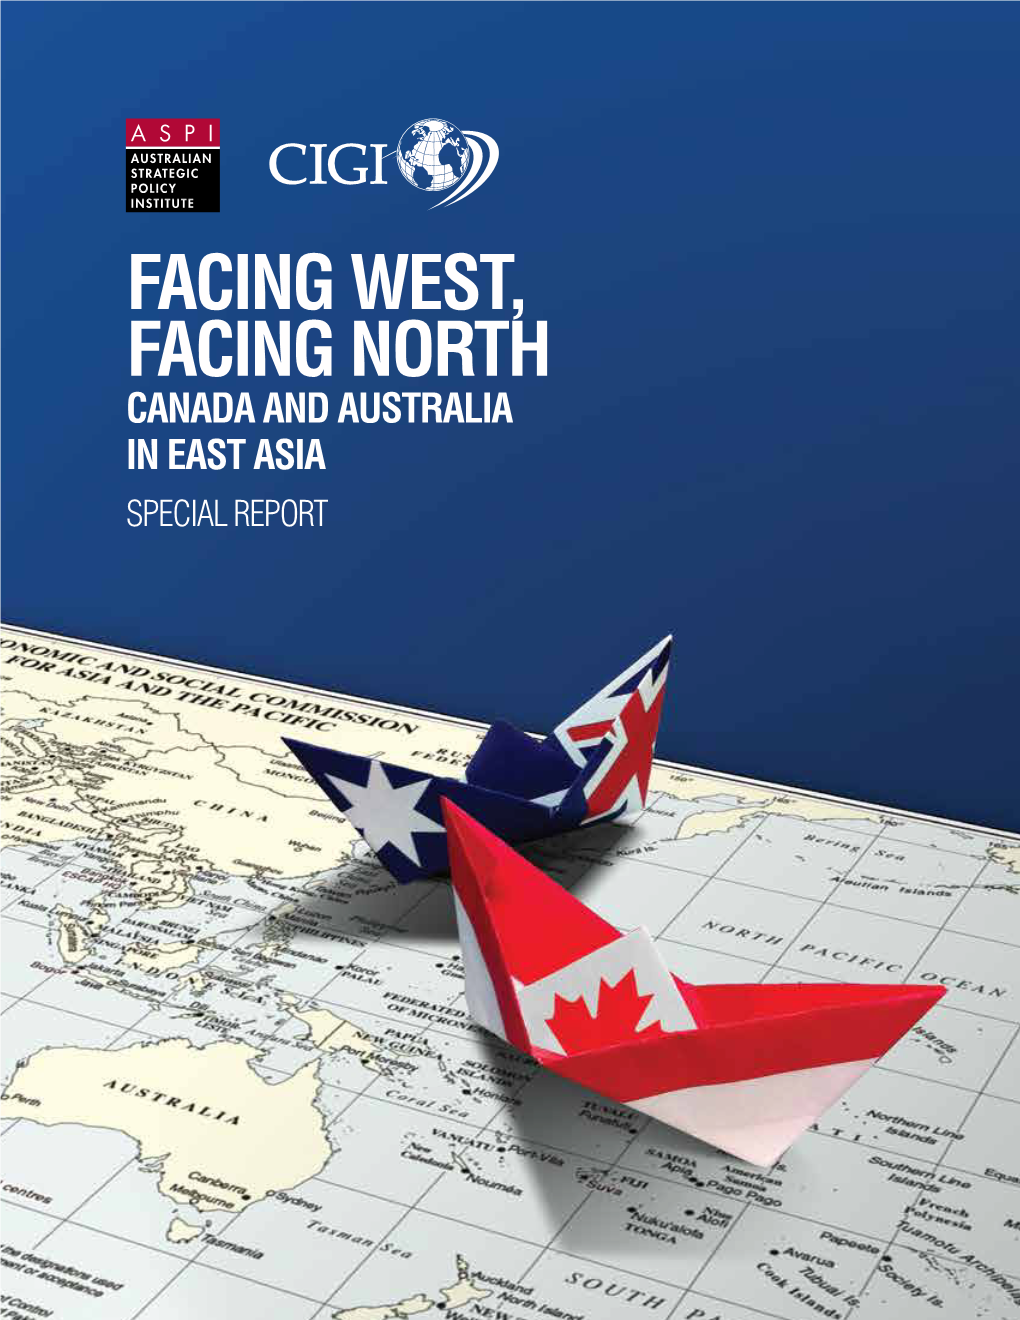 Facing West, Facing North: Canada and Australia in East Asia